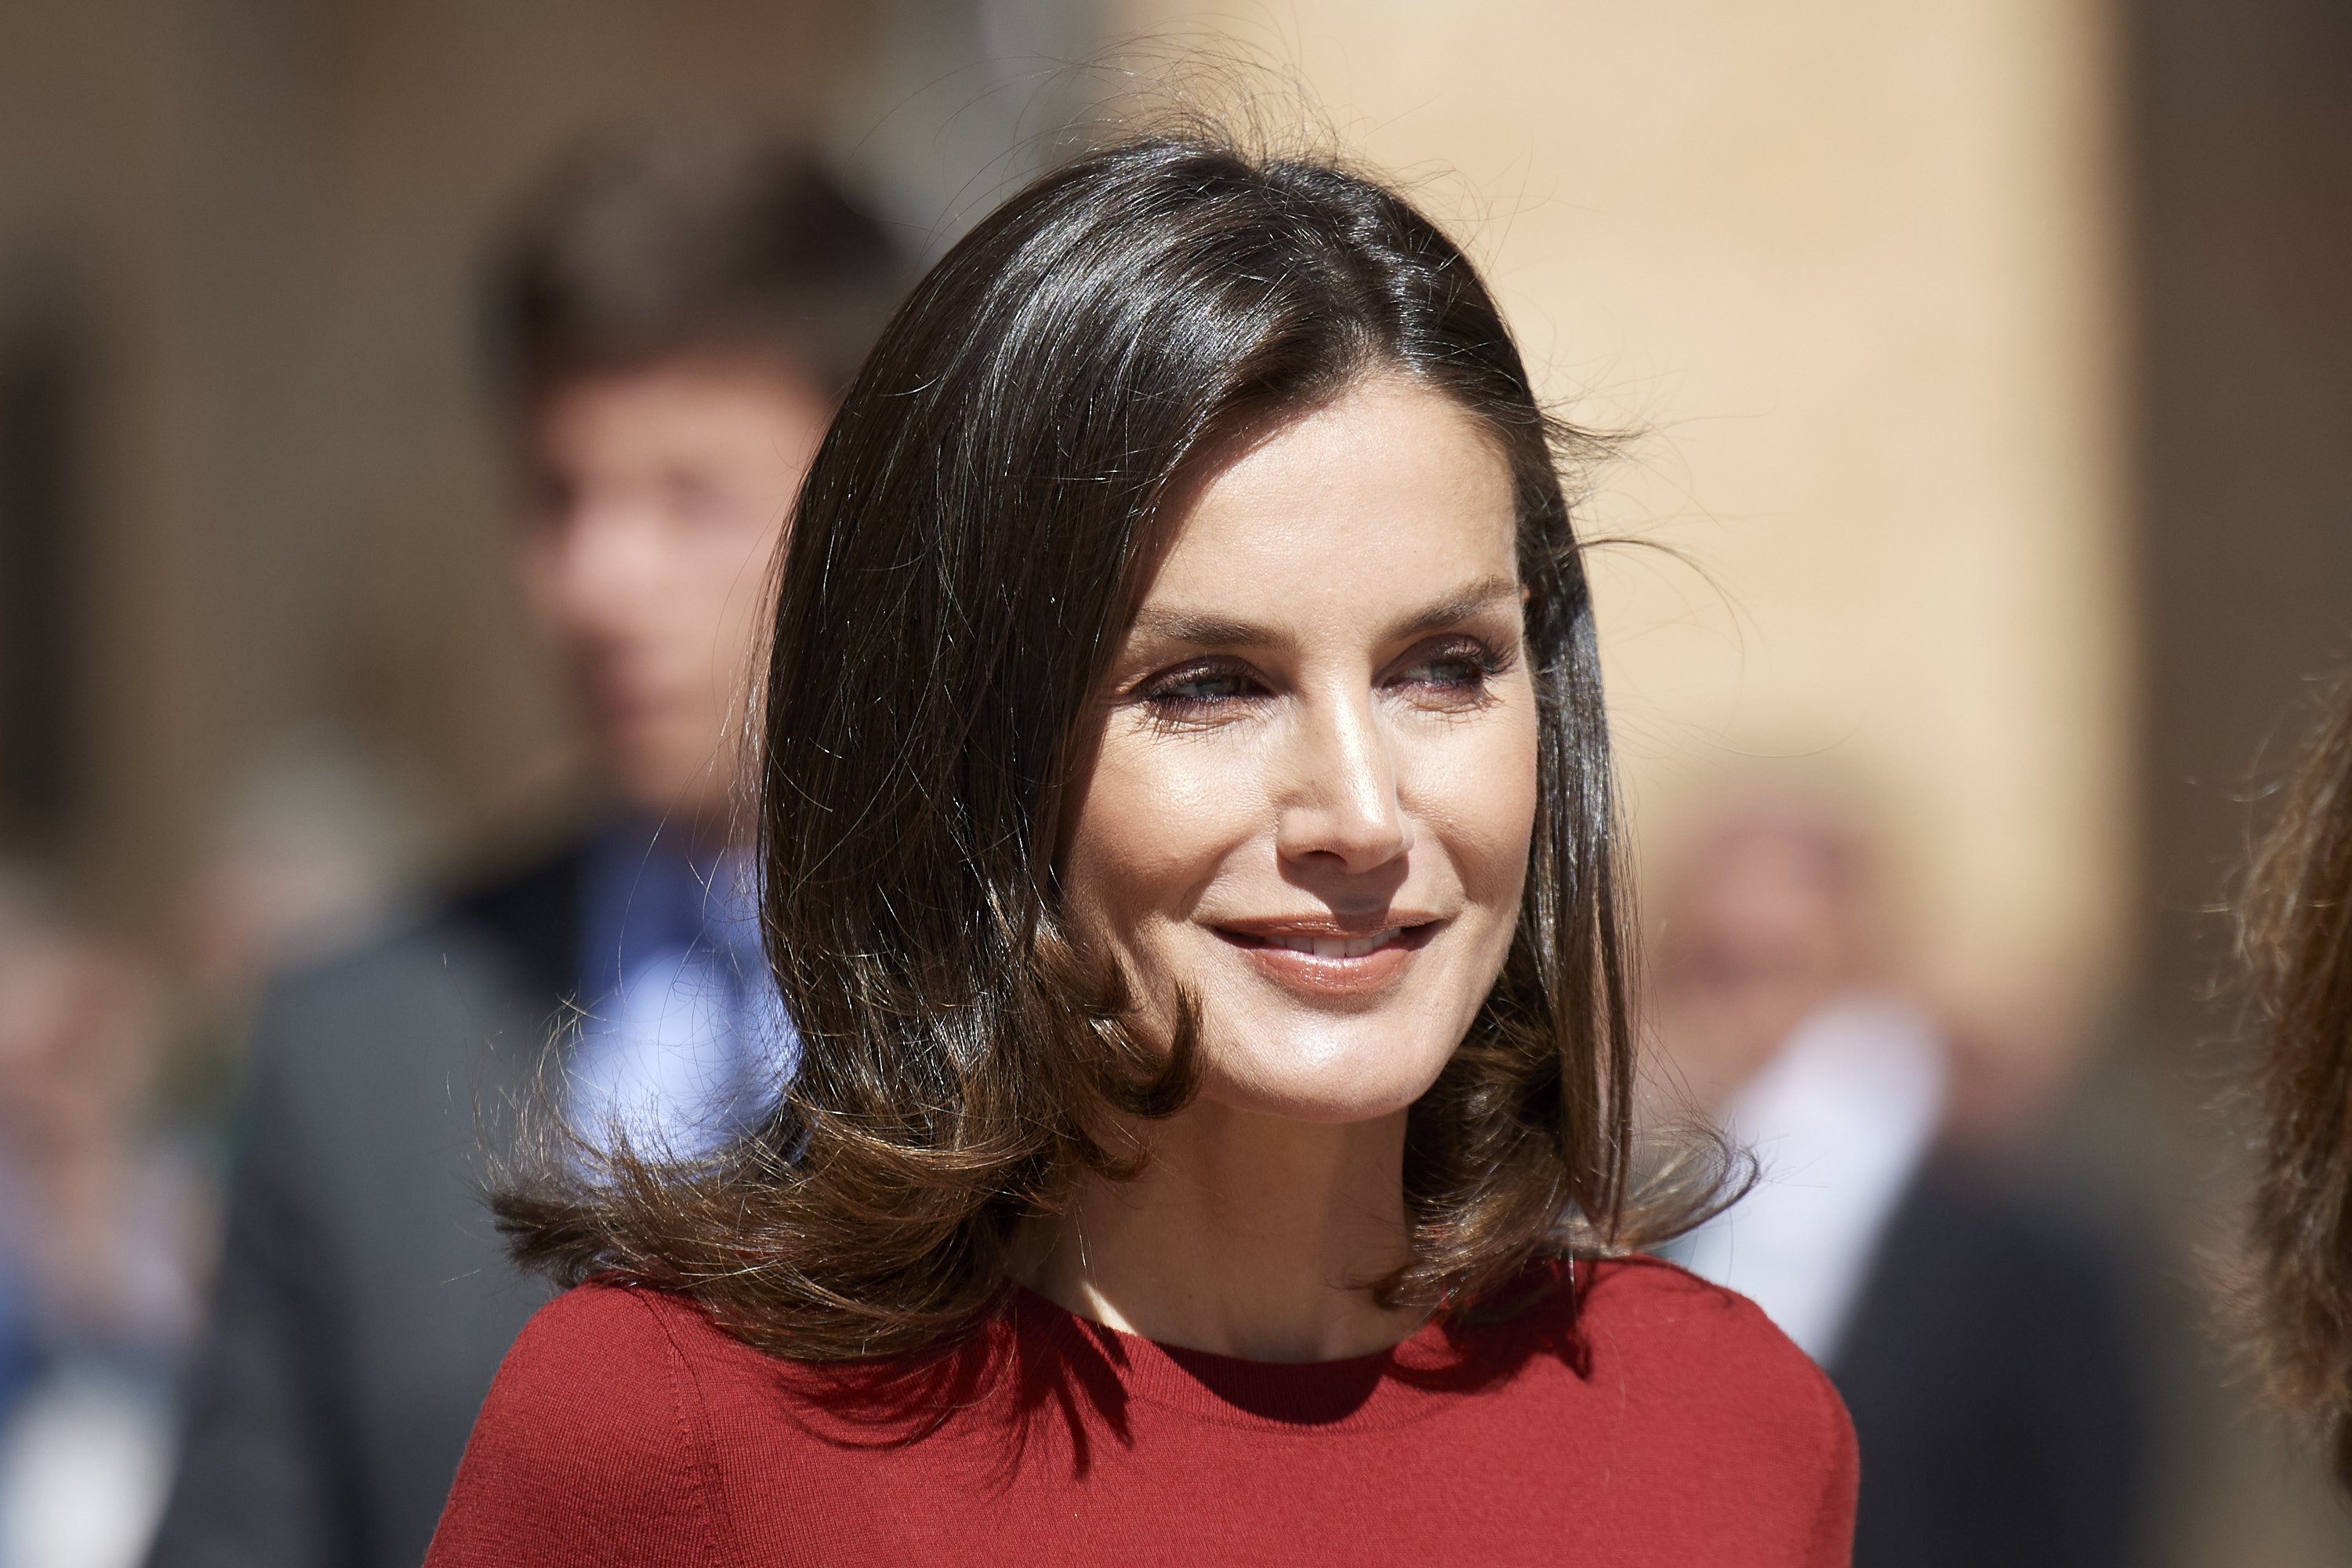 Queen Letizia Of Spain attends the closure Of Journalist's Seminar on June 12, 2019 | Photo: GettyImages